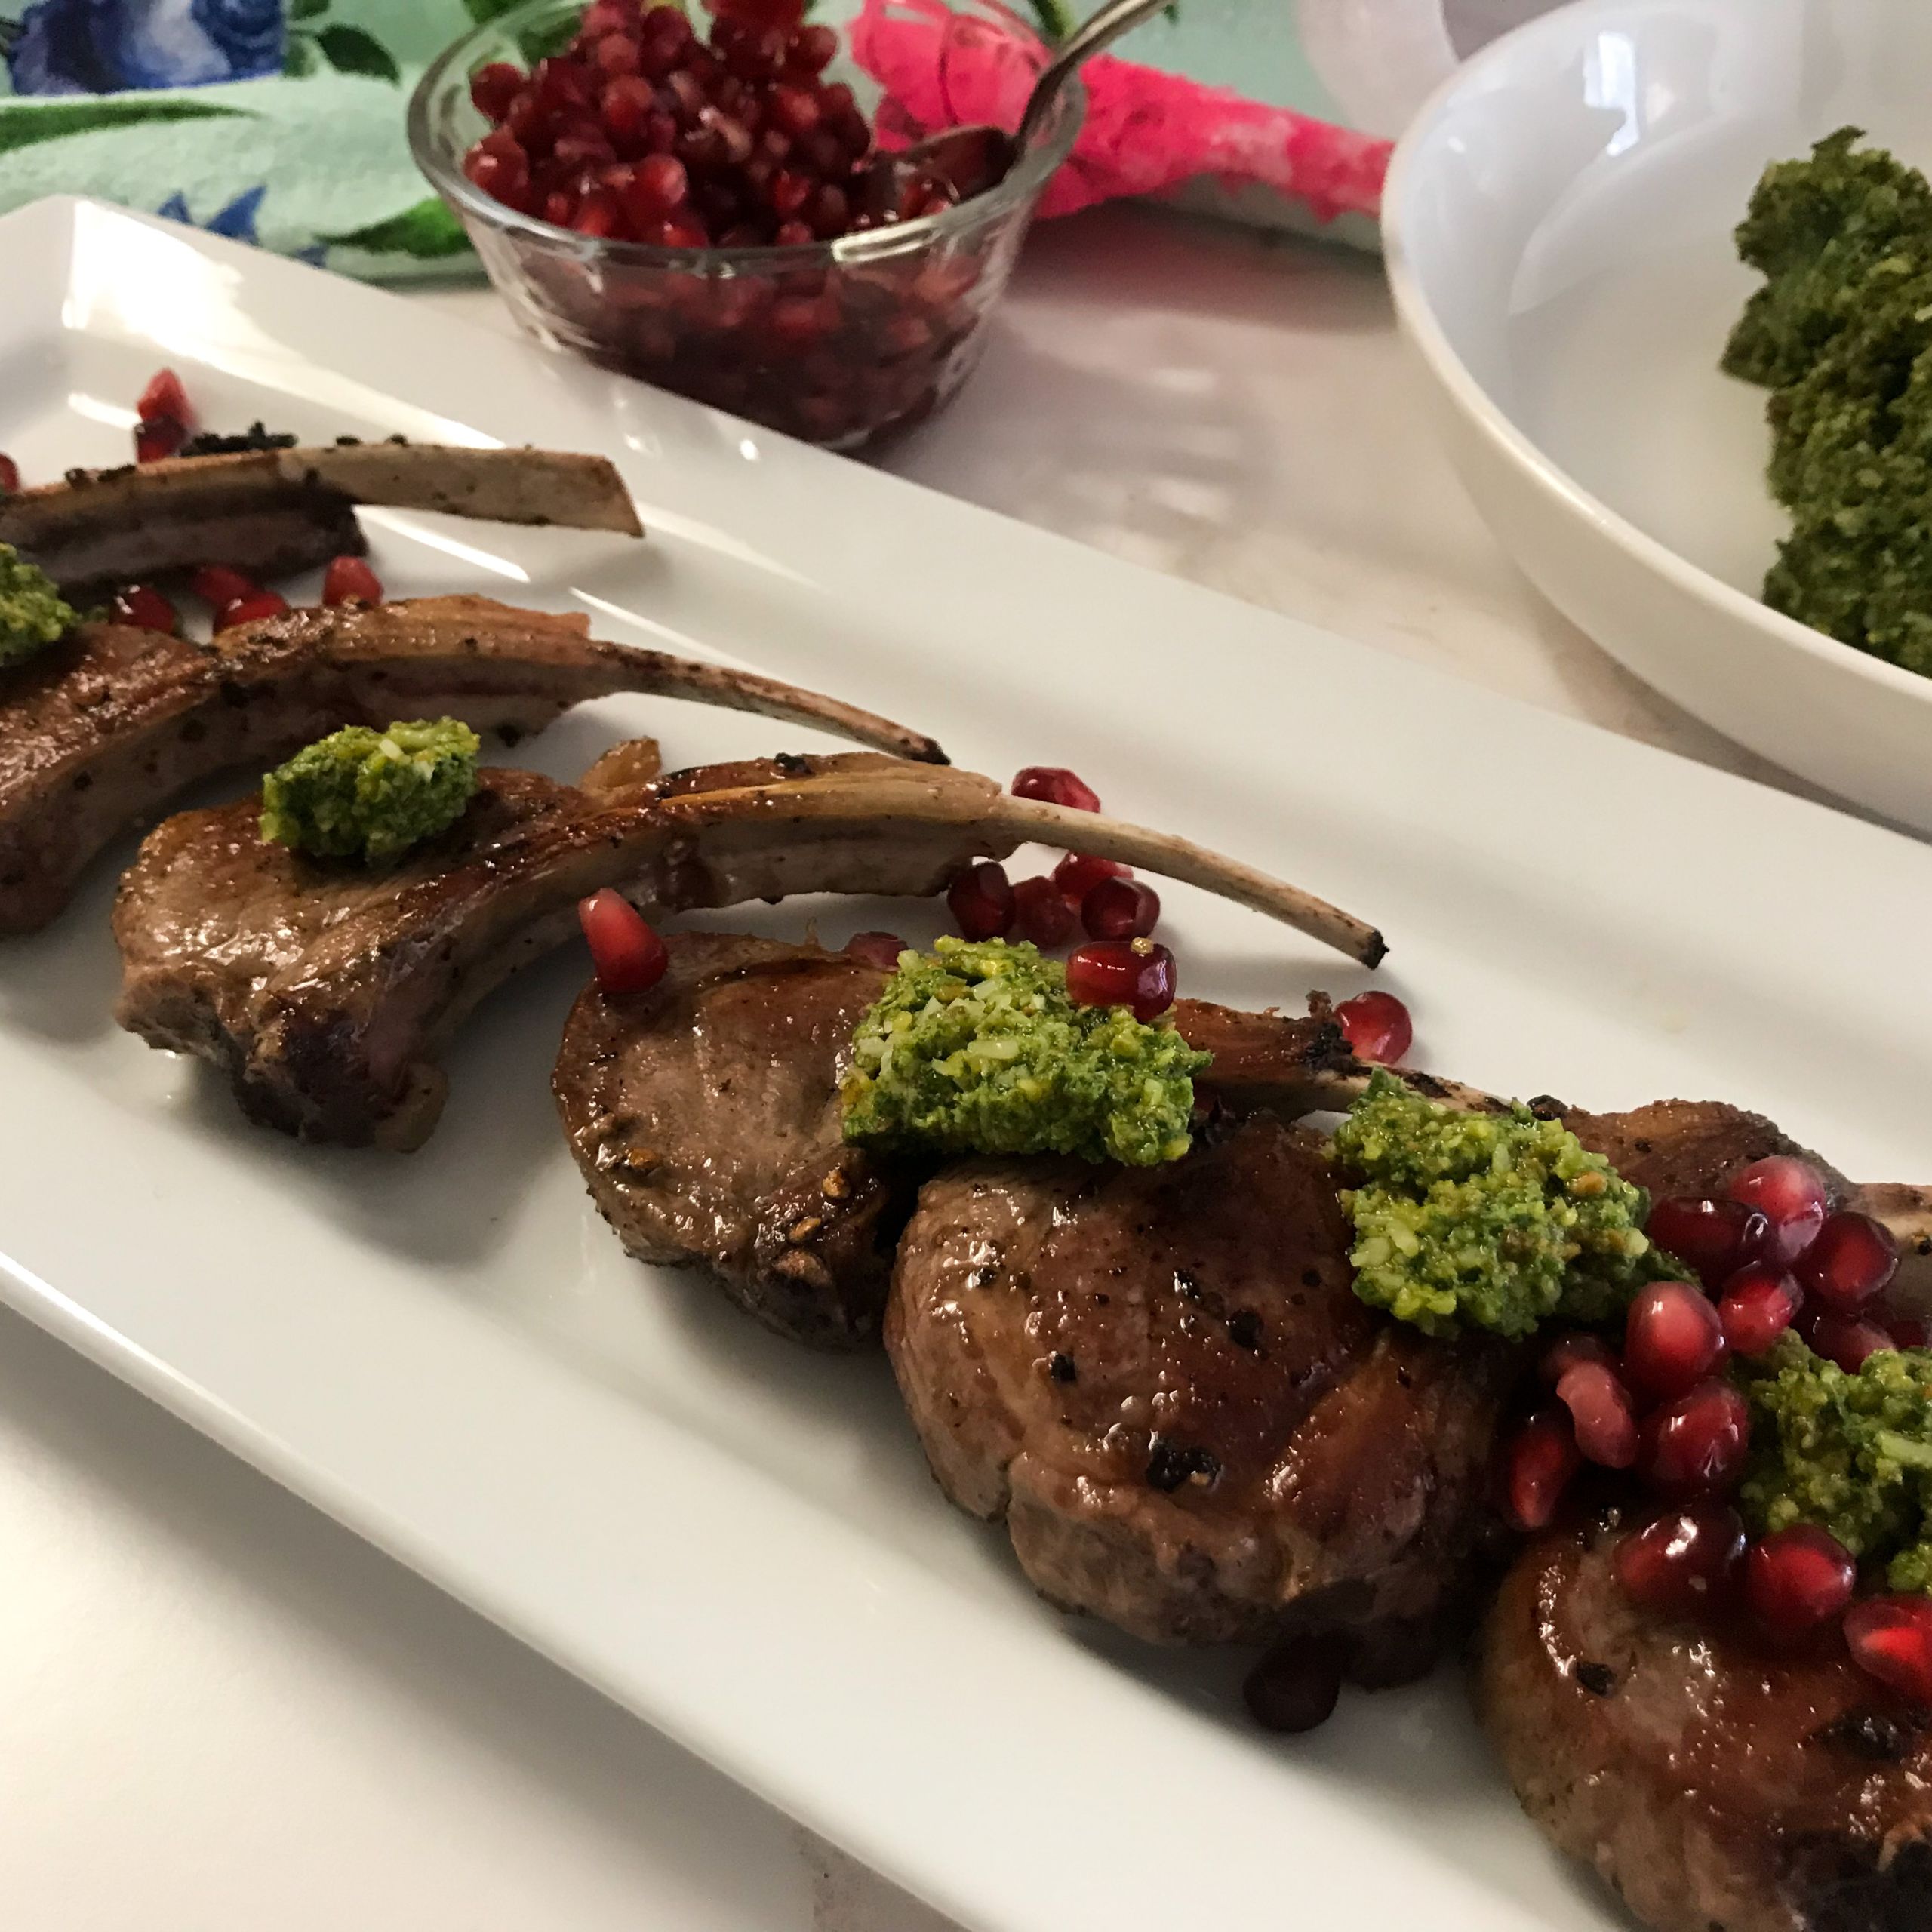 FINISHED LAMB CHOPS TOPPED WITH PESTO AND POMEGRANATE SEEDS ON PLATTER | MY CURATED TASTES